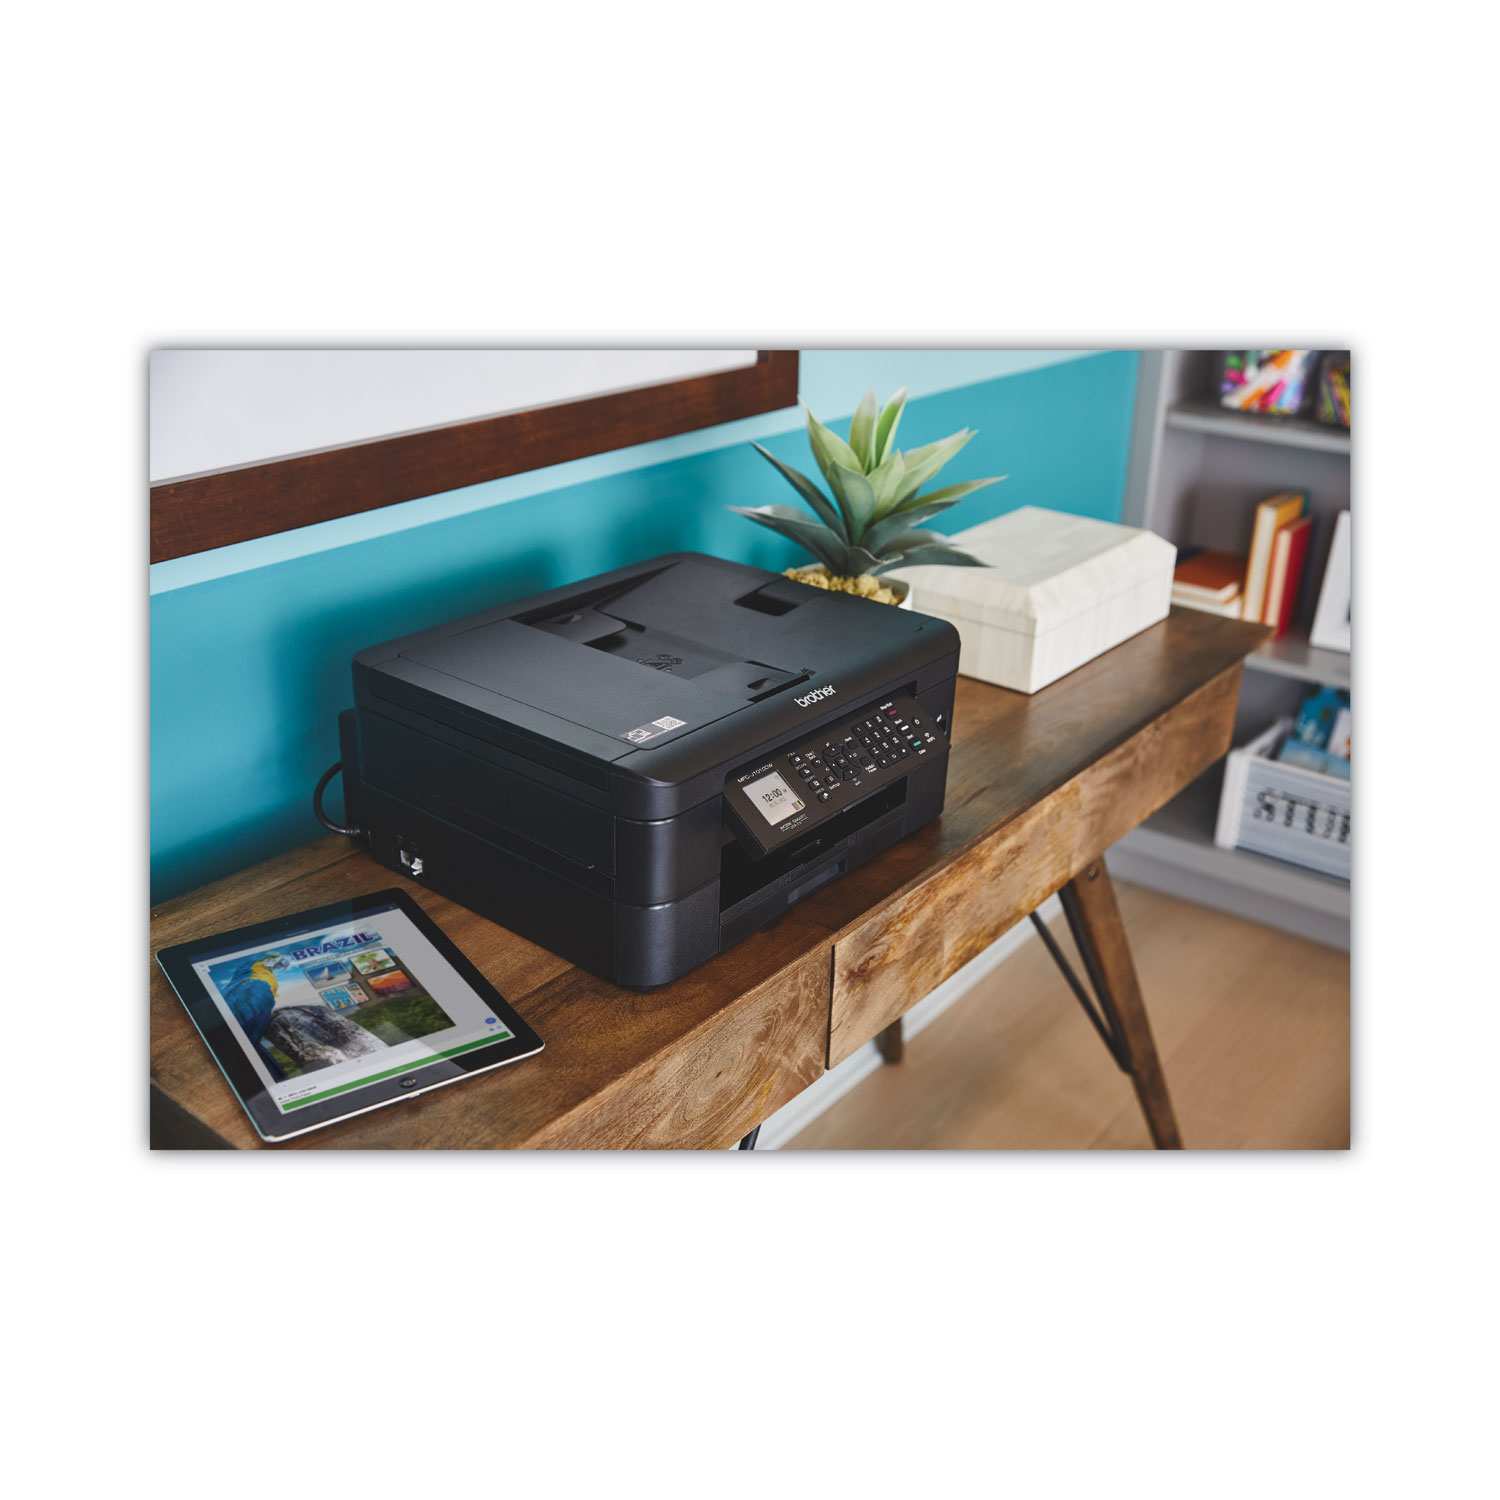 Brother MFC-J1010DW Wireless Color Inkjet All-in-One Printer with